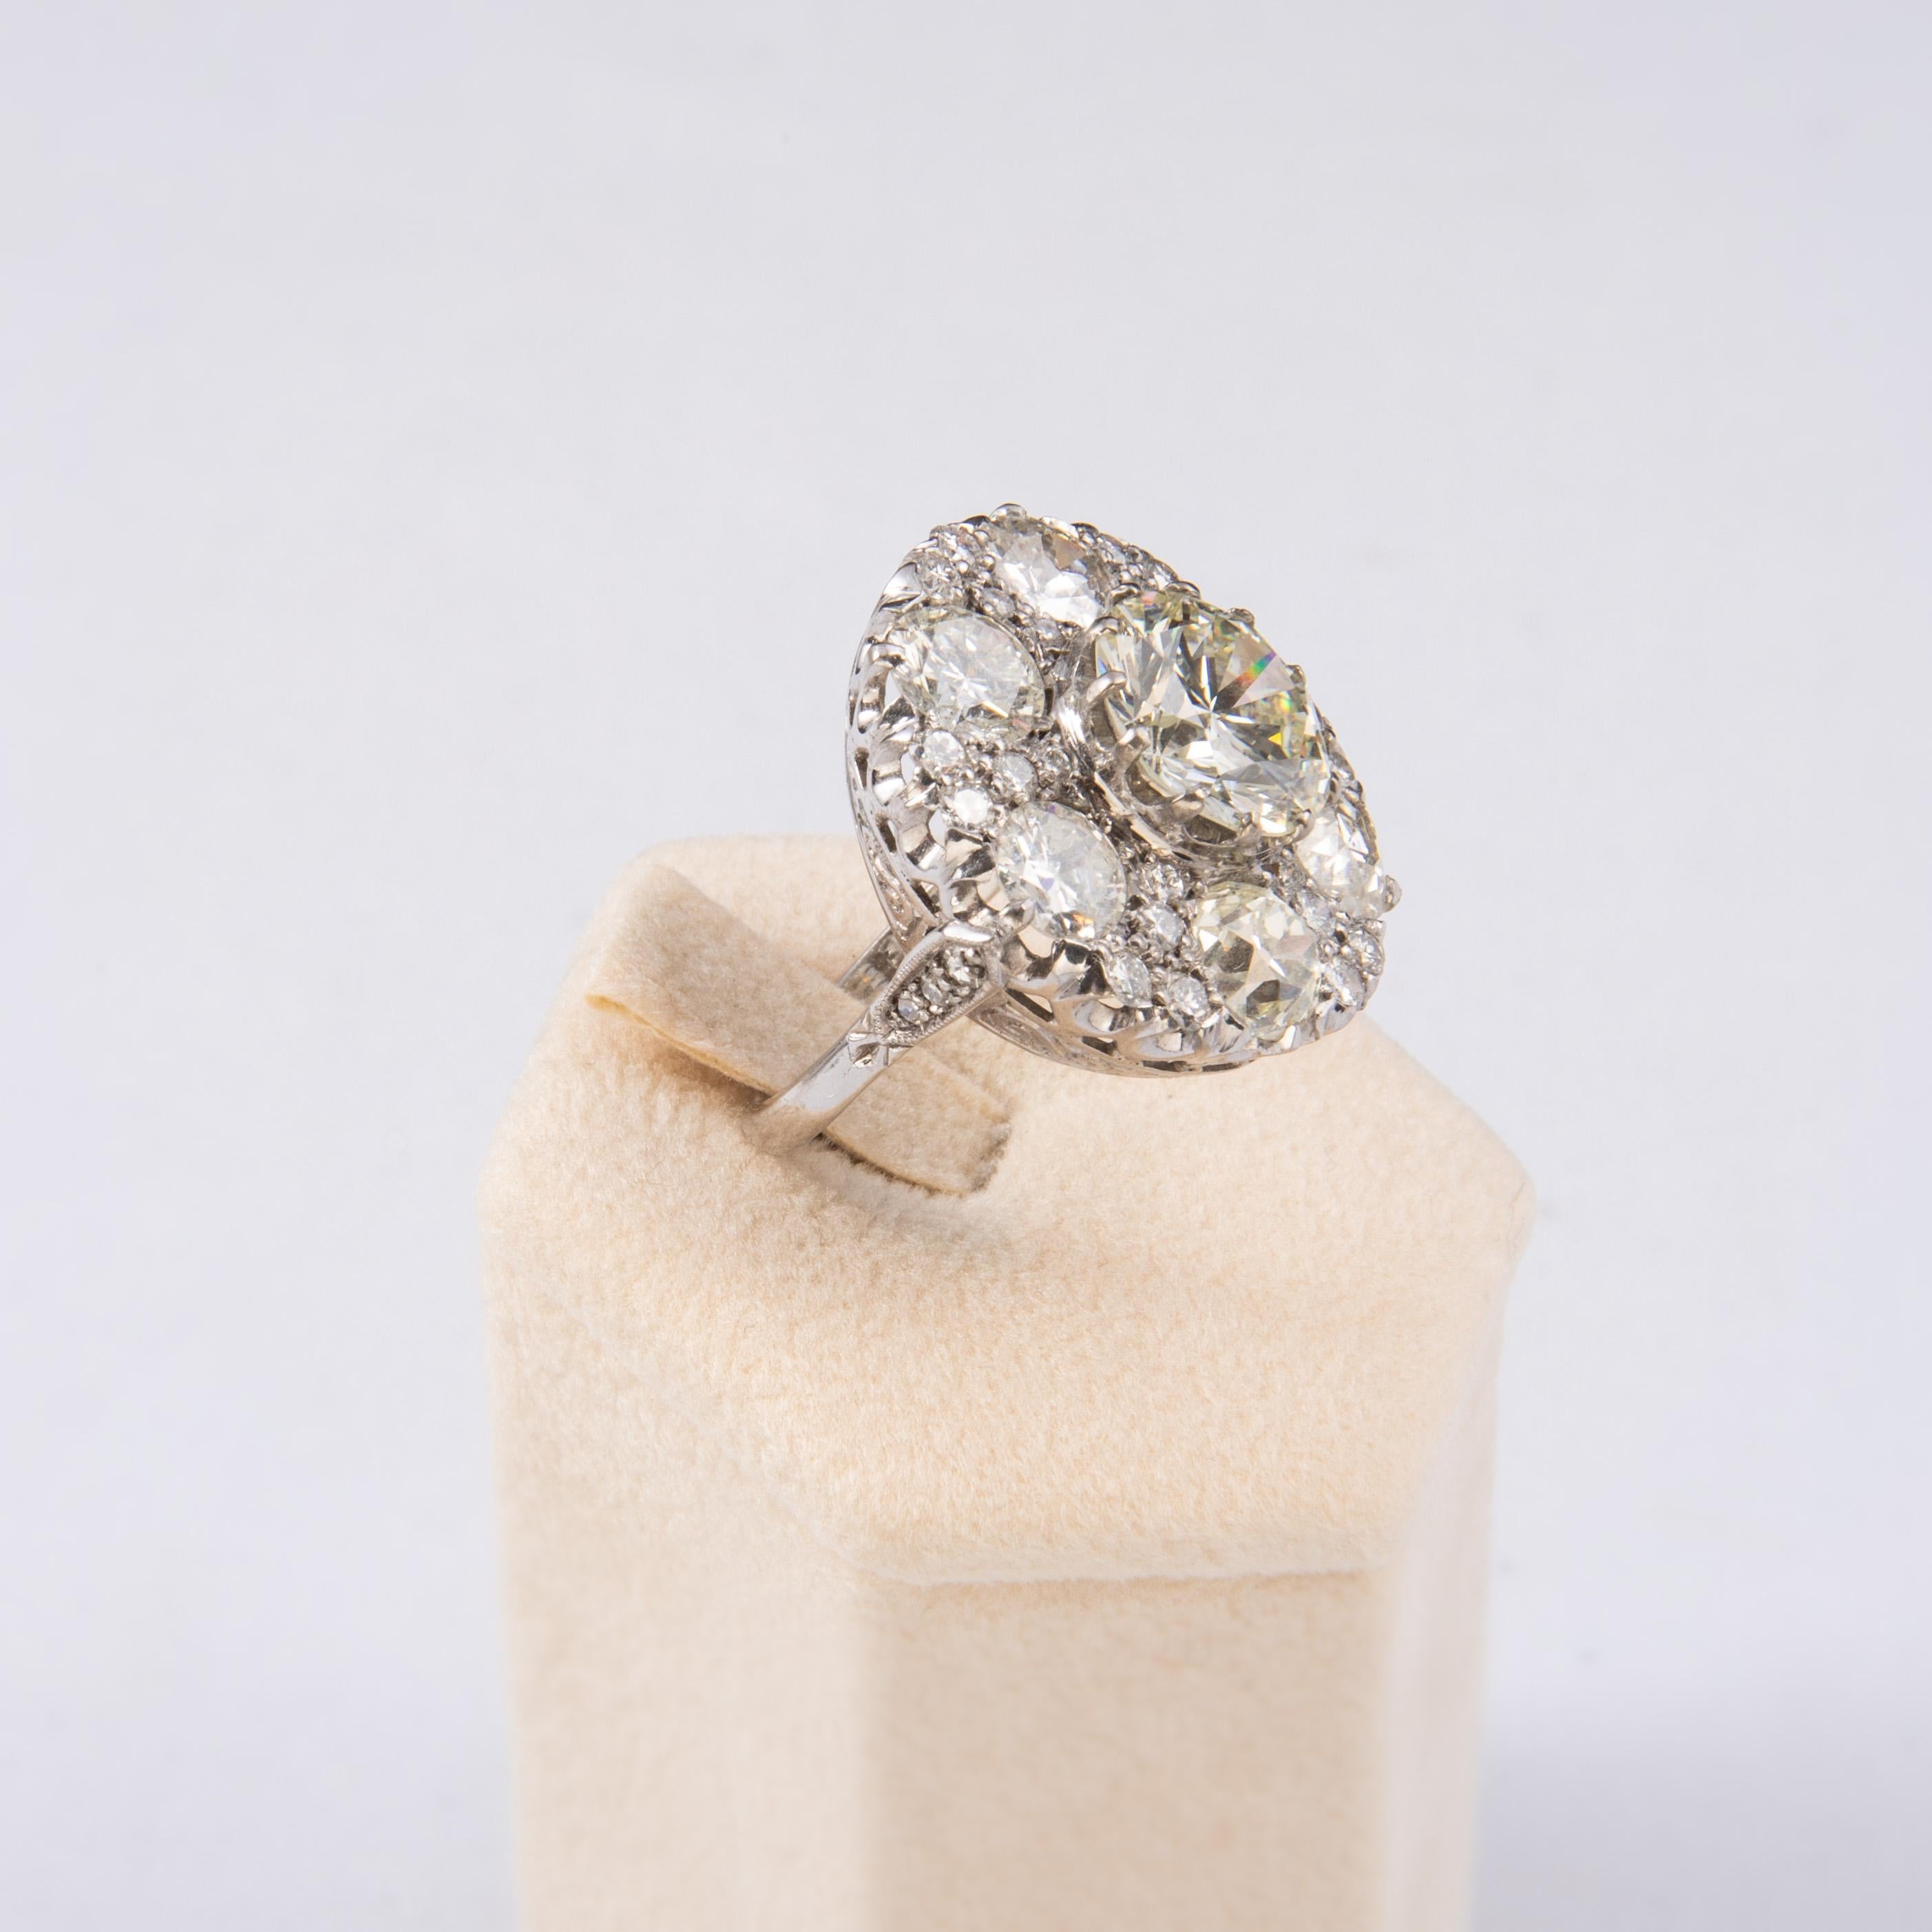 This magnificent vintage 4,04 carat diamond ring dates circa 1940s and is centered with one round brilliant cut diamond weighing 4.04 carats and set with six diamond old cut 0,80 ct each for a total 10 ct. The diamond is GIA certified L/S1 and has a